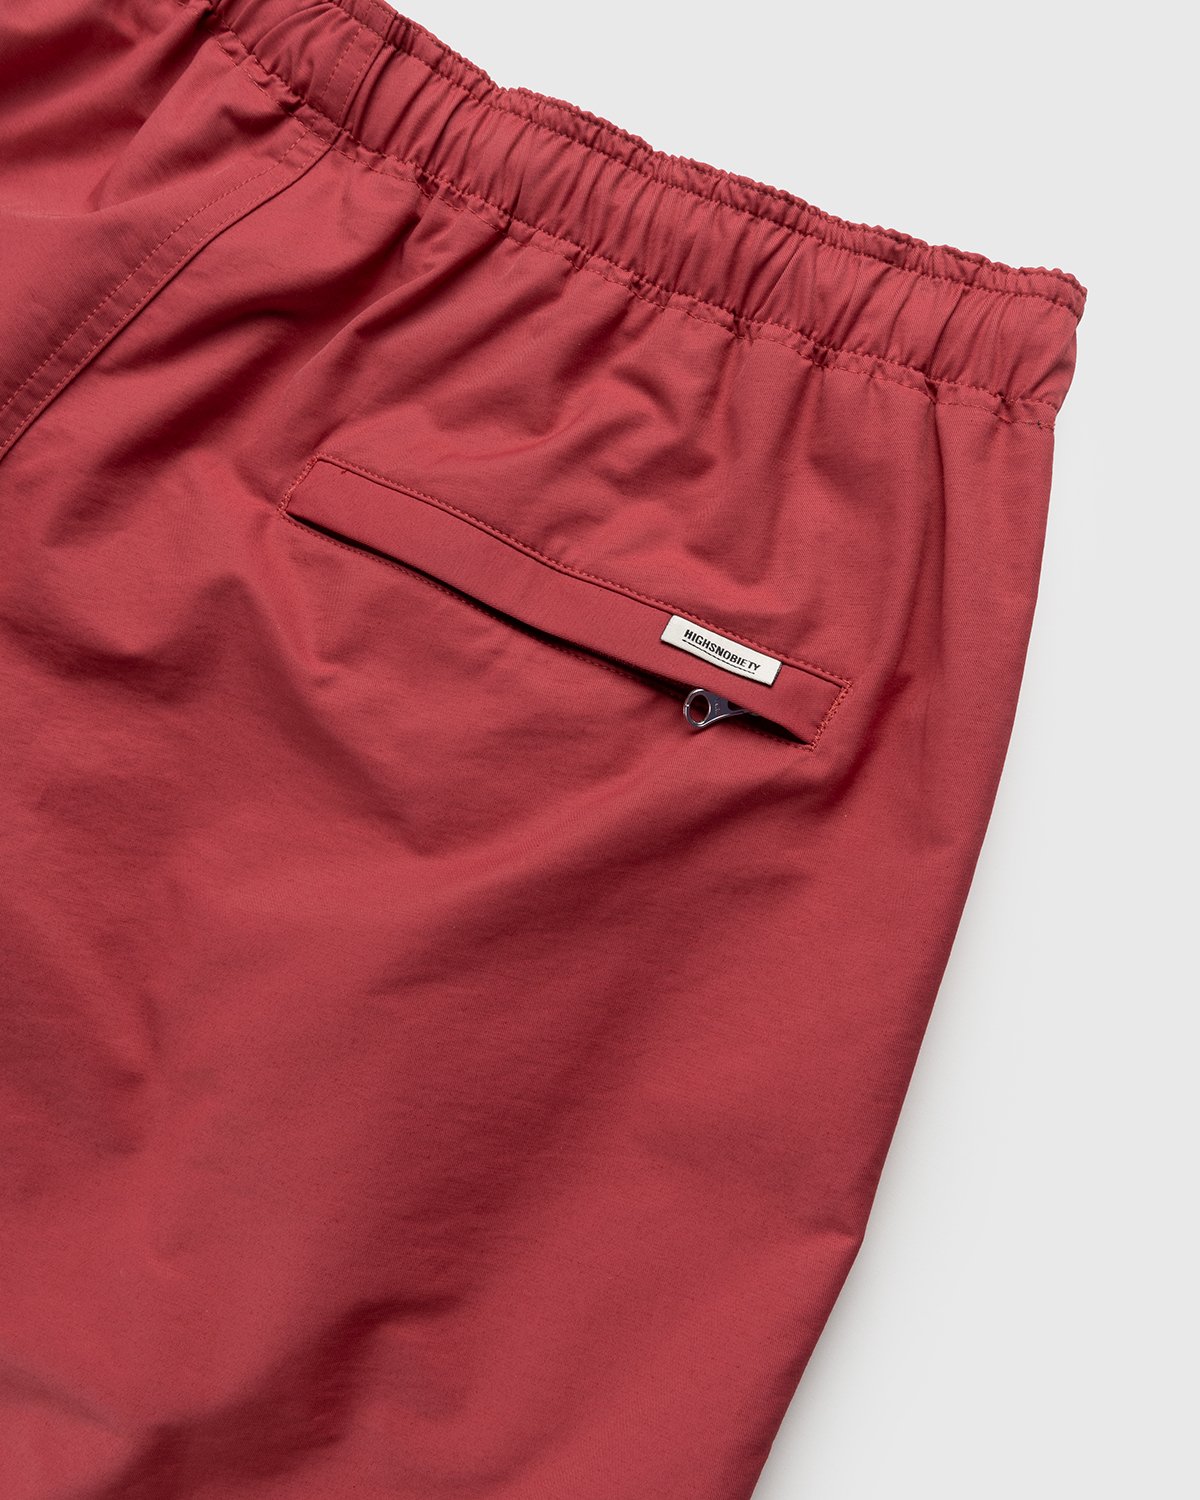 Highsnobiety - Cotton Nylon Water Short Red - Clothing - Pink - Image 4